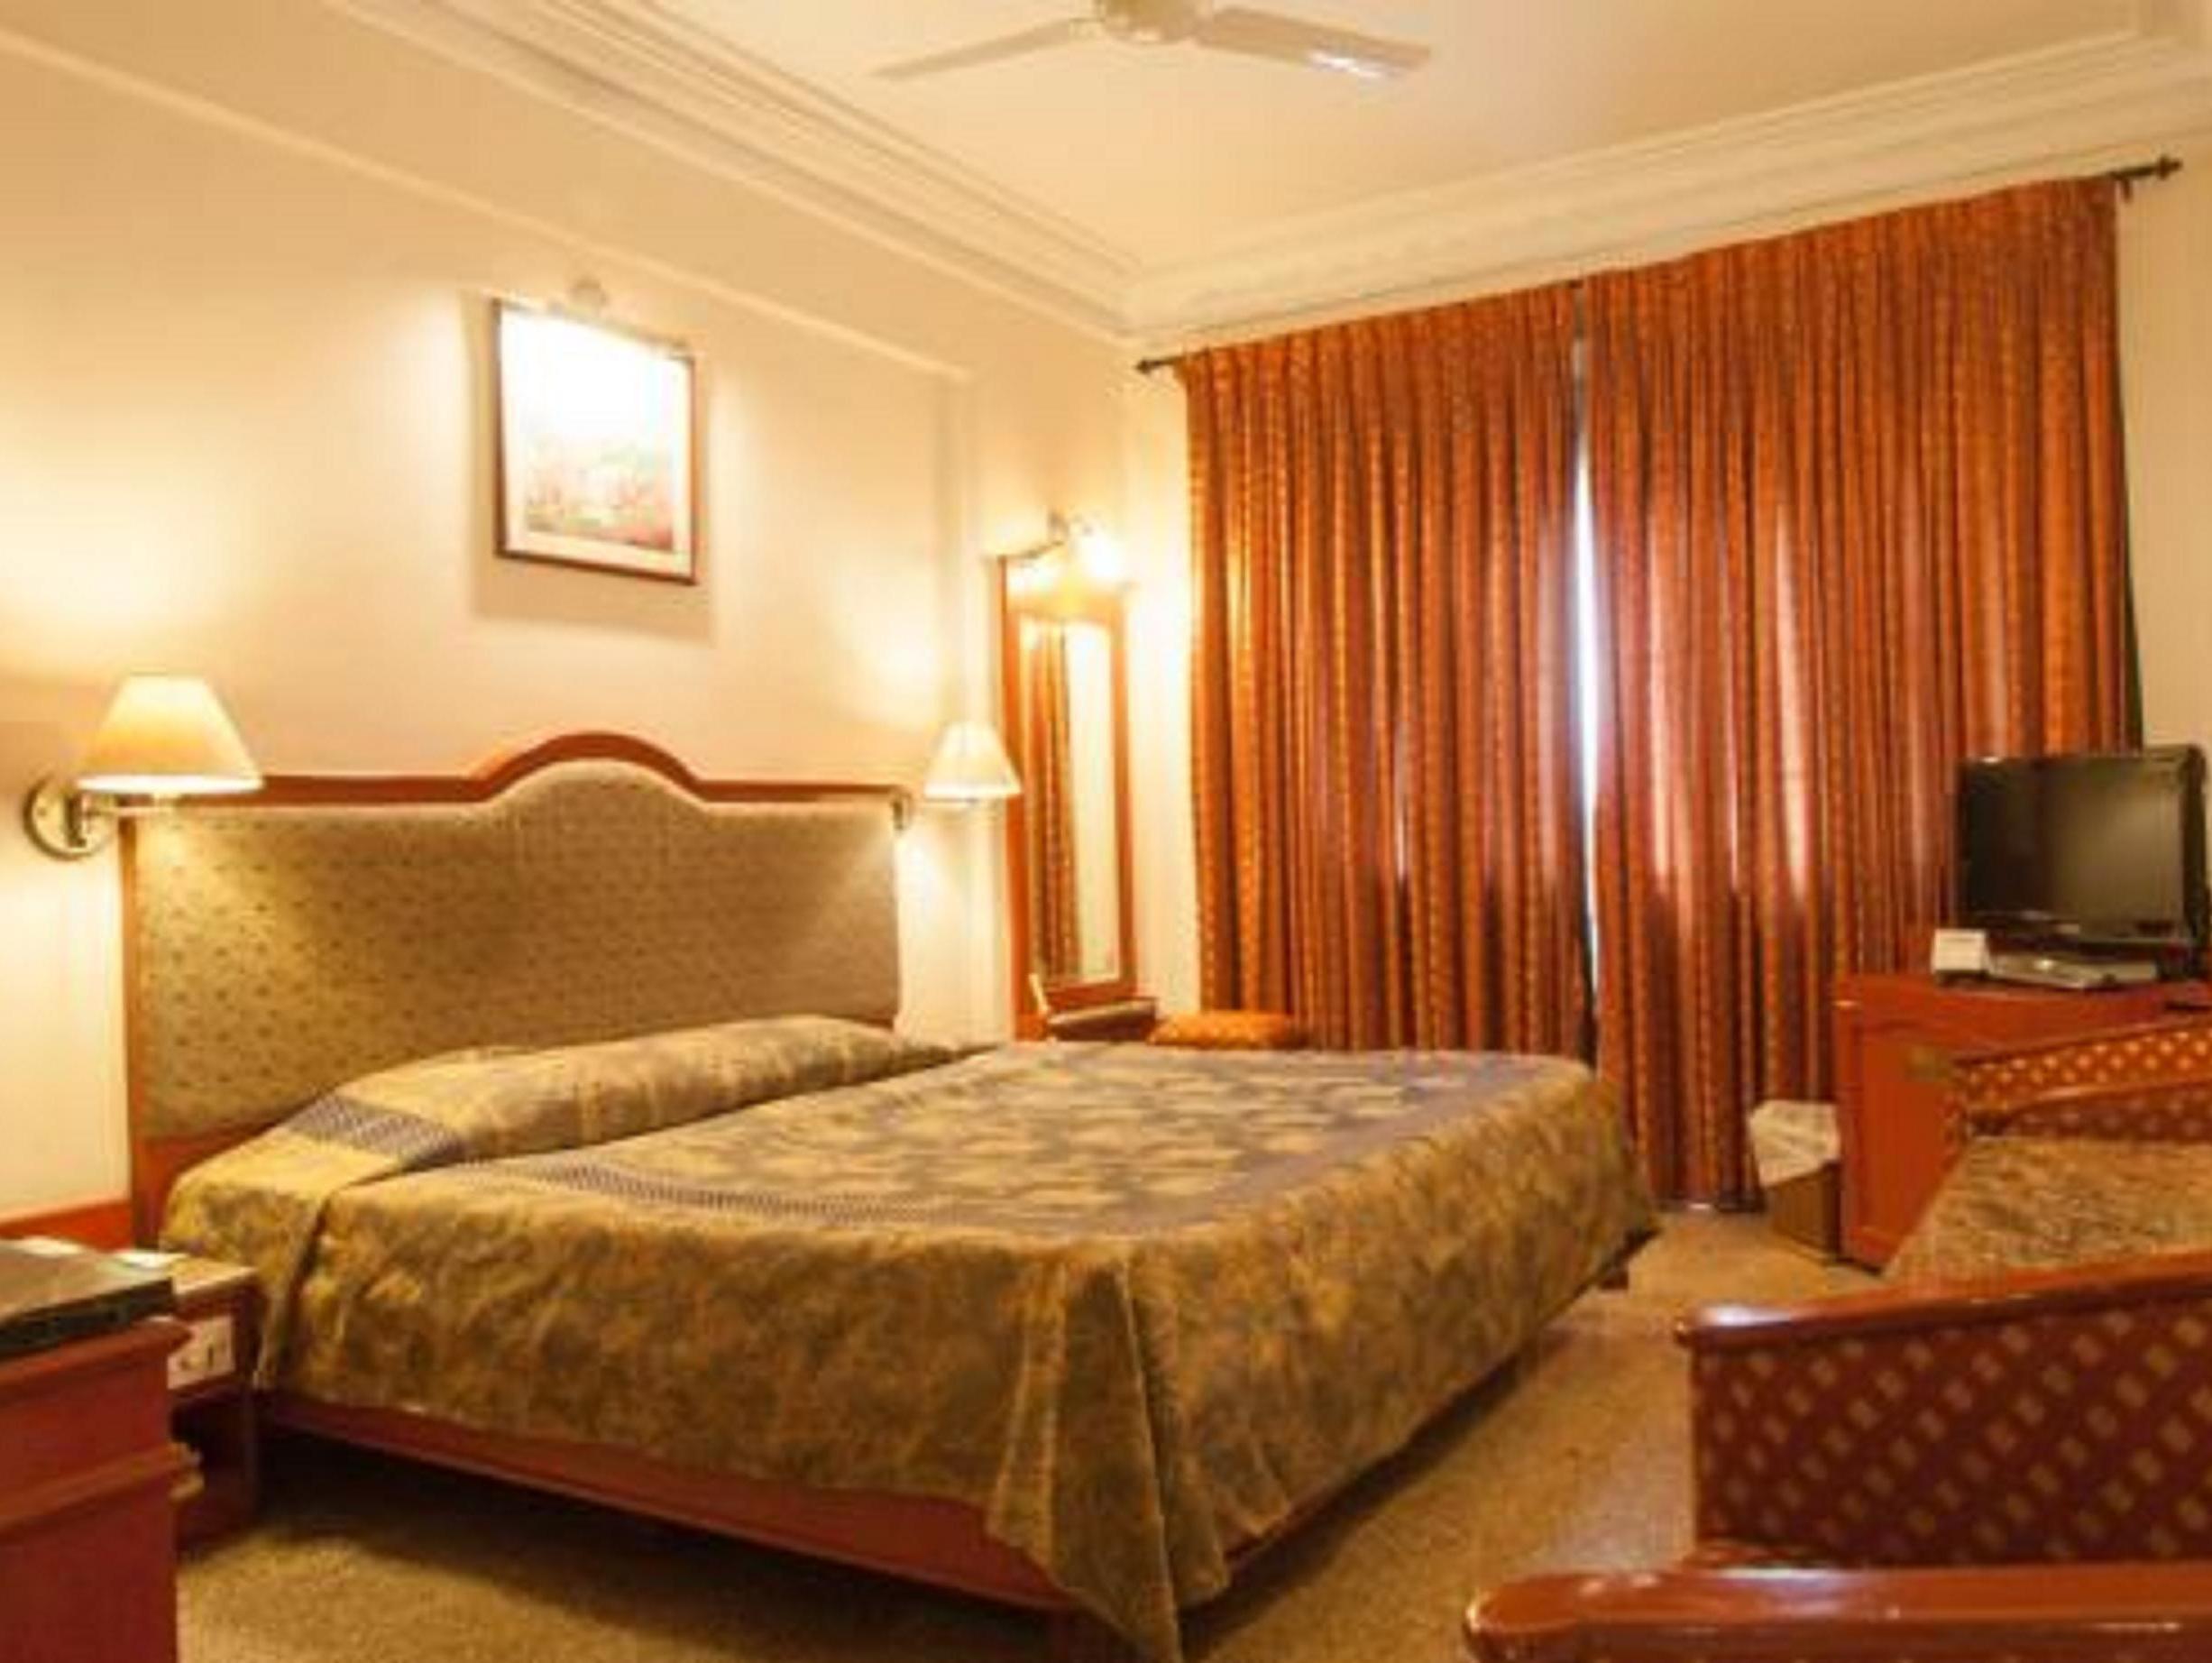 Vestin Park Chennai Hotel Chennai FAQ 2017, What facilities are there in Vestin Park Chennai Hotel Chennai 2017, What Languages Spoken are Supported in Vestin Park Chennai Hotel Chennai 2017, Which payment cards are accepted in Vestin Park Chennai Hotel Chennai , Chennai Vestin Park Chennai Hotel room facilities and services Q&A 2017, Chennai Vestin Park Chennai Hotel online booking services 2017, Chennai Vestin Park Chennai Hotel address 2017, Chennai Vestin Park Chennai Hotel telephone number 2017,Chennai Vestin Park Chennai Hotel map 2017, Chennai Vestin Park Chennai Hotel traffic guide 2017, how to go Chennai Vestin Park Chennai Hotel, Chennai Vestin Park Chennai Hotel booking online 2017, Chennai Vestin Park Chennai Hotel room types 2017.